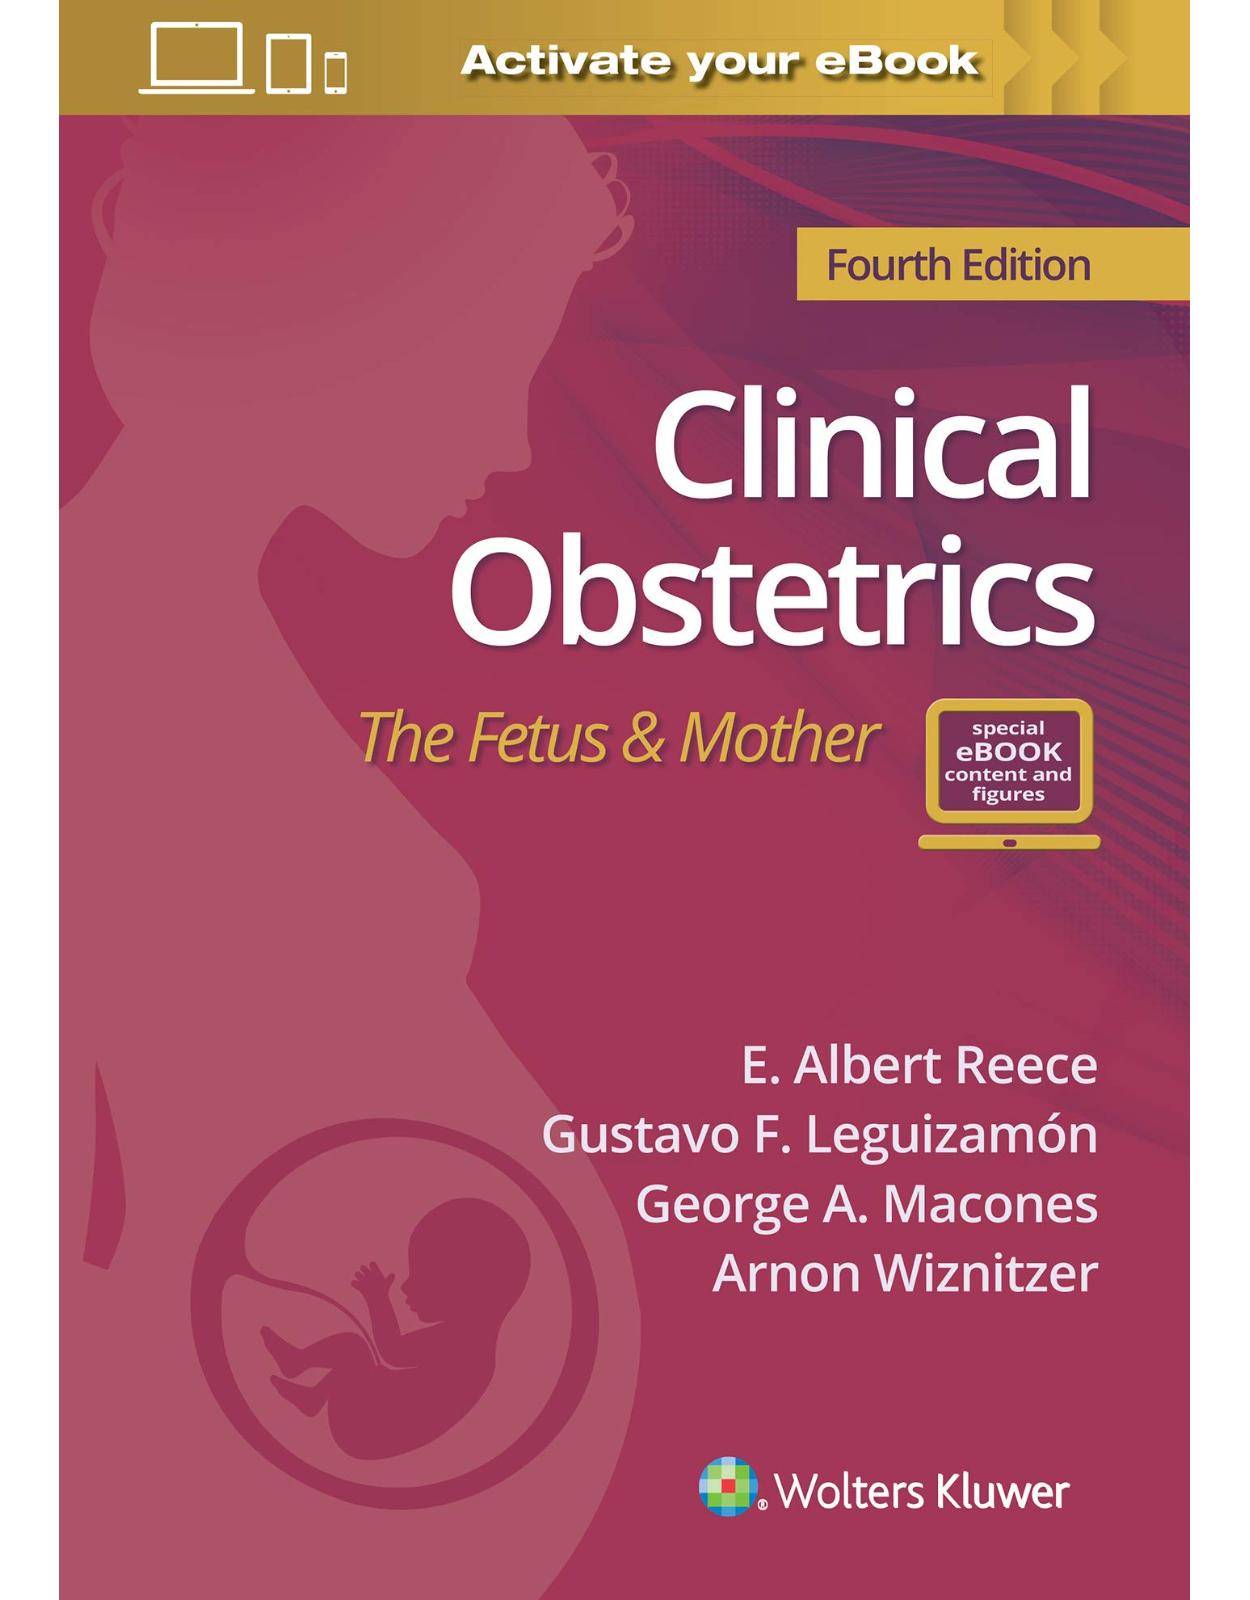 Clinical Obstetrics: The Fetus & Mother